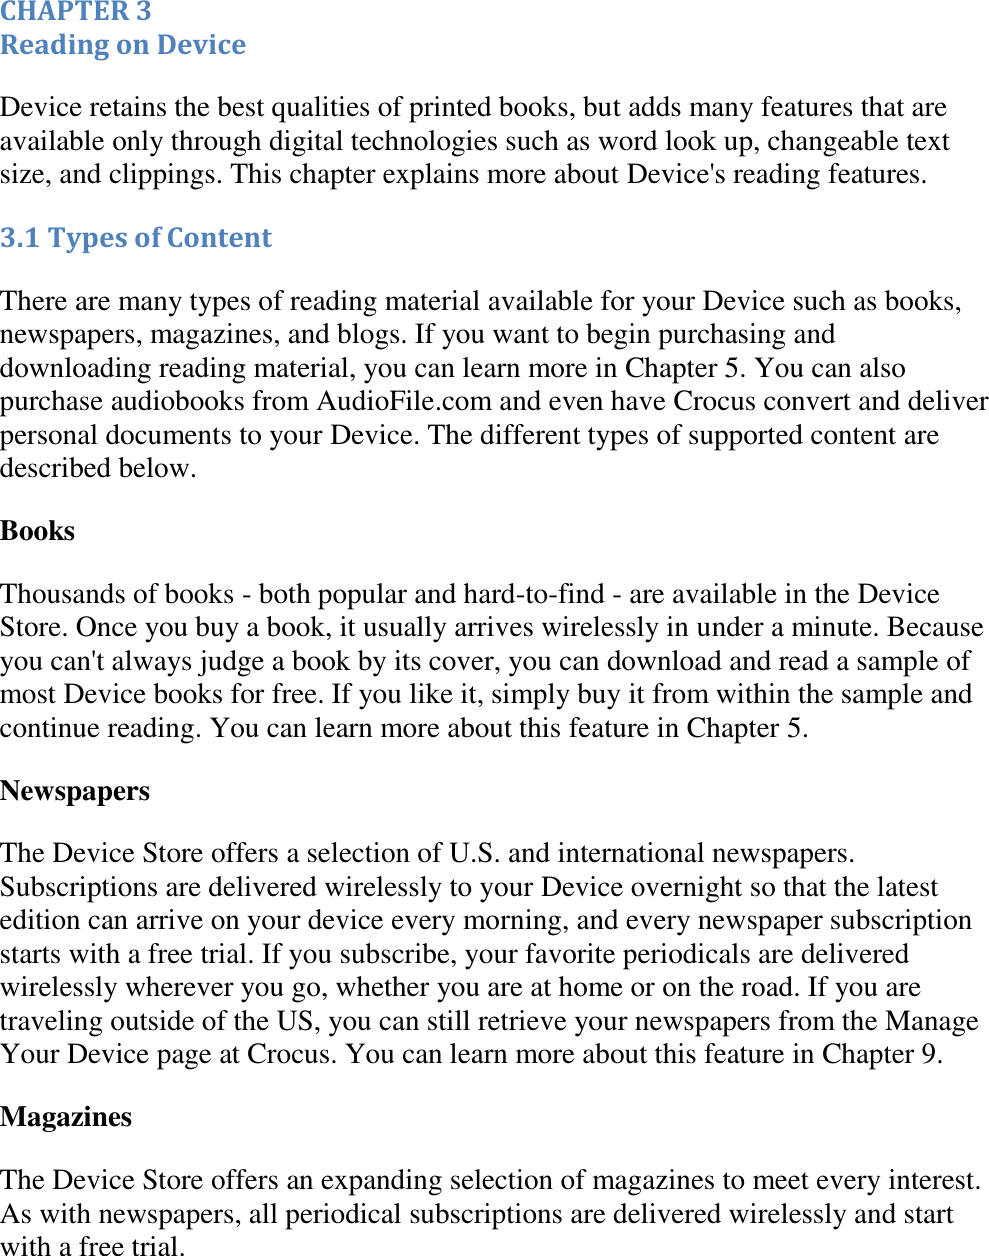   CHAPTER 3 Reading on Device Device retains the best qualities of printed books, but adds many features that are available only through digital technologies such as word look up, changeable text size, and clippings. This chapter explains more about Device&apos;s reading features. 3.1 Types of Content There are many types of reading material available for your Device such as books, newspapers, magazines, and blogs. If you want to begin purchasing and downloading reading material, you can learn more in Chapter 5. You can also purchase audiobooks from AudioFile.com and even have Crocus convert and deliver personal documents to your Device. The different types of supported content are described below. Books Thousands of books - both popular and hard-to-find - are available in the Device Store. Once you buy a book, it usually arrives wirelessly in under a minute. Because you can&apos;t always judge a book by its cover, you can download and read a sample of most Device books for free. If you like it, simply buy it from within the sample and continue reading. You can learn more about this feature in Chapter 5. Newspapers The Device Store offers a selection of U.S. and international newspapers. Subscriptions are delivered wirelessly to your Device overnight so that the latest edition can arrive on your device every morning, and every newspaper subscription starts with a free trial. If you subscribe, your favorite periodicals are delivered wirelessly wherever you go, whether you are at home or on the road. If you are traveling outside of the US, you can still retrieve your newspapers from the Manage Your Device page at Crocus. You can learn more about this feature in Chapter 9. Magazines The Device Store offers an expanding selection of magazines to meet every interest. As with newspapers, all periodical subscriptions are delivered wirelessly and start with a free trial. 